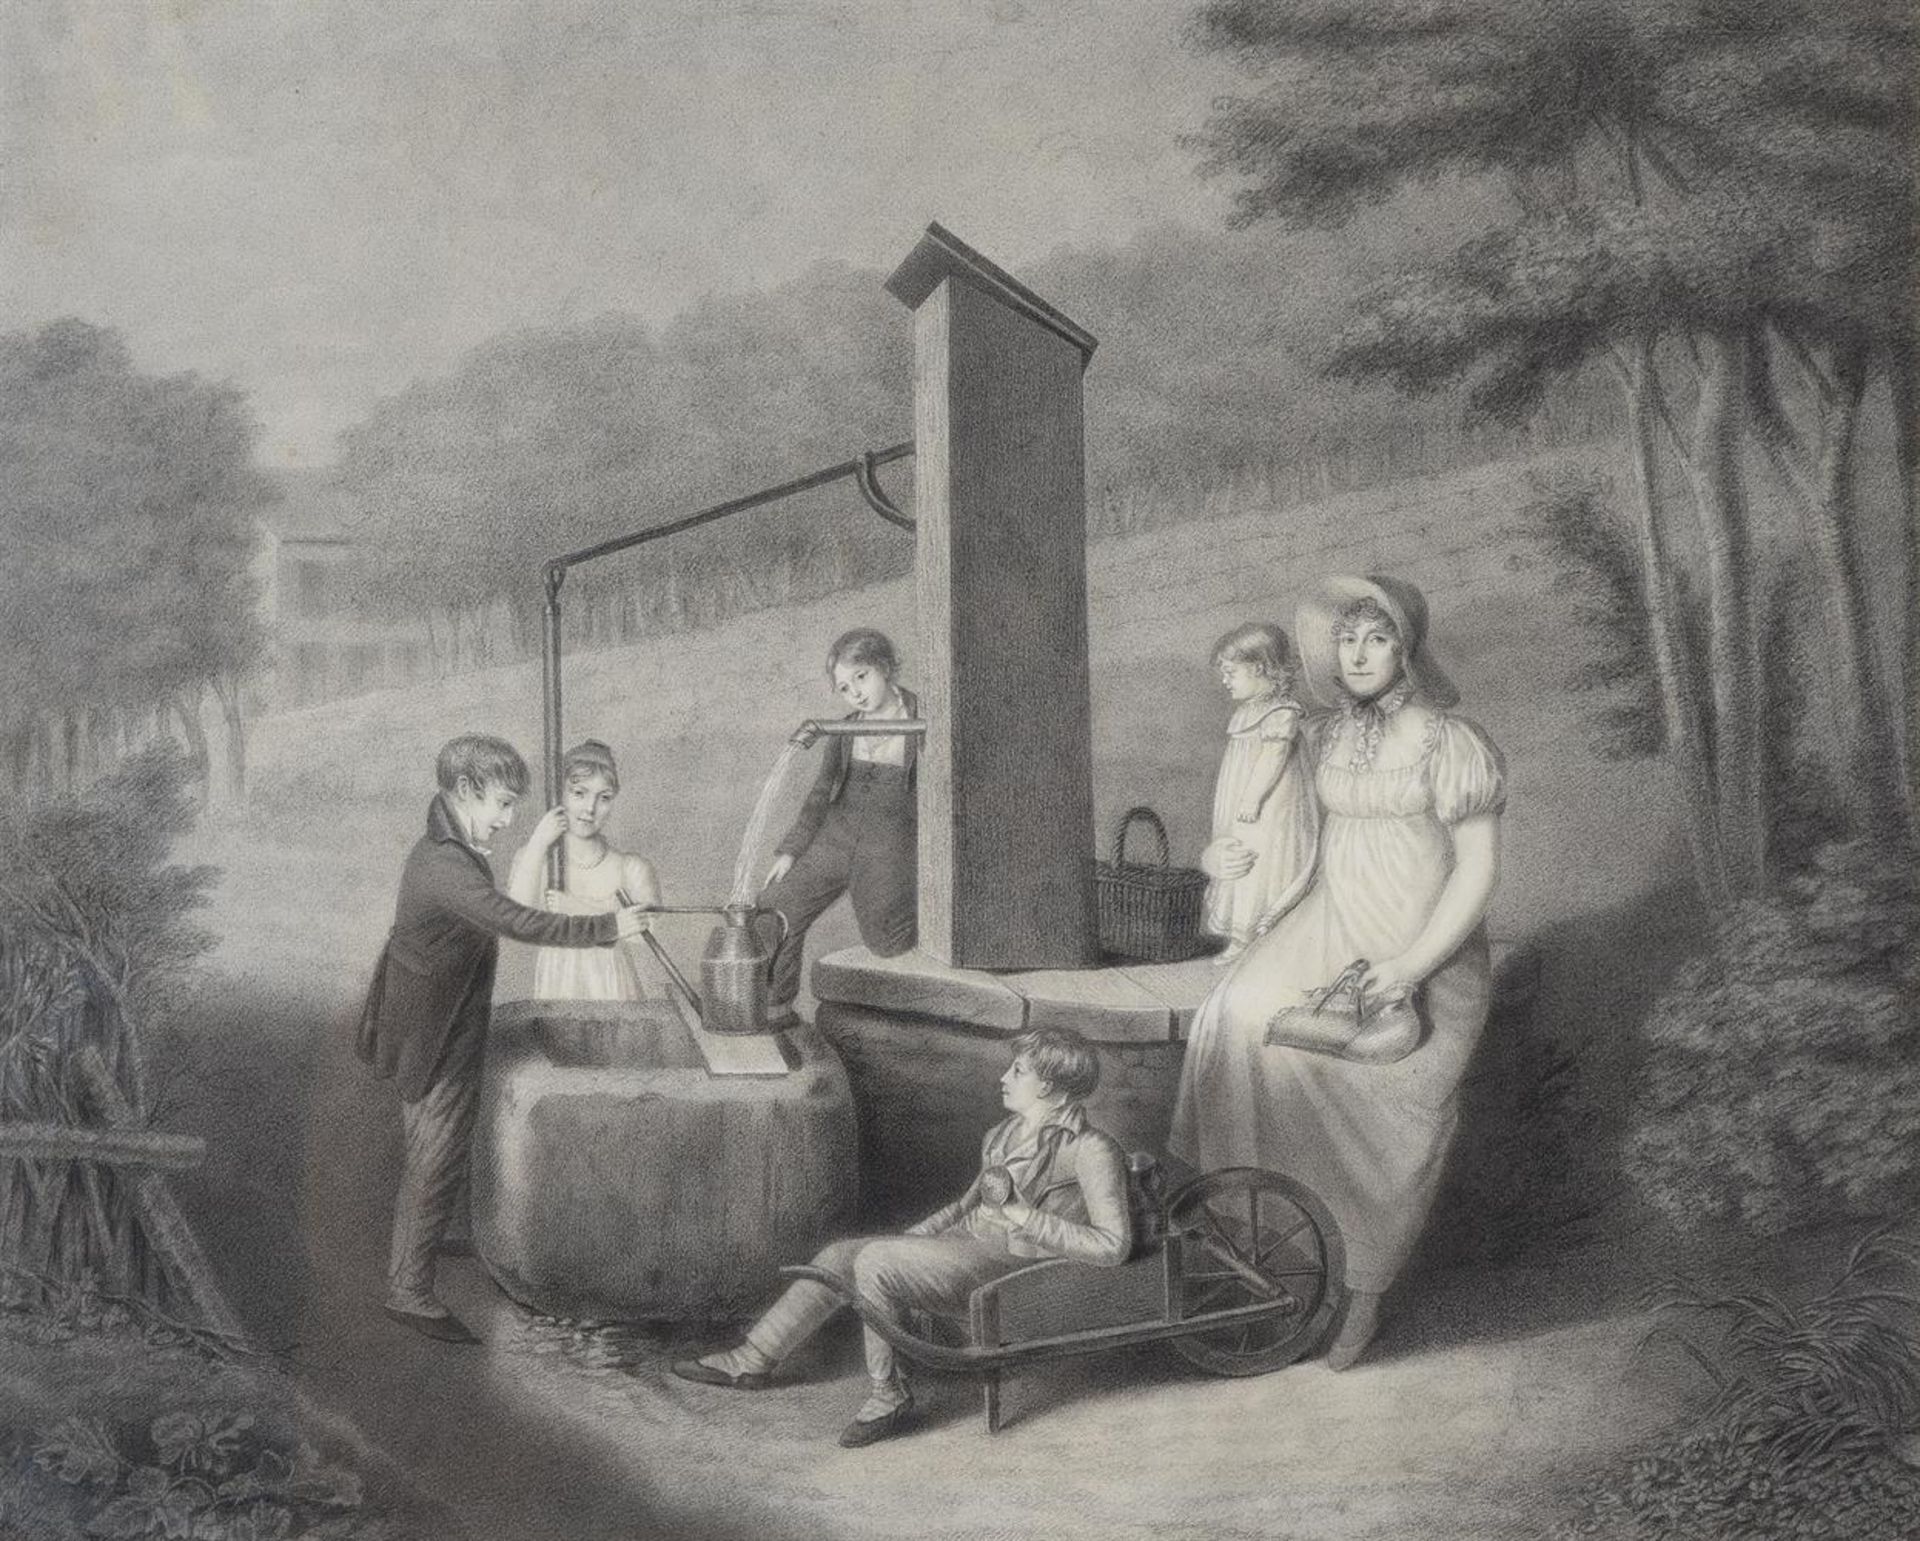 ATTRIBUTED TO NICOLAS-HENRI JACOB (FRENCH 1782-1871), PORTRAIT OF A FAMILY AROUND A GARDEN PUMP